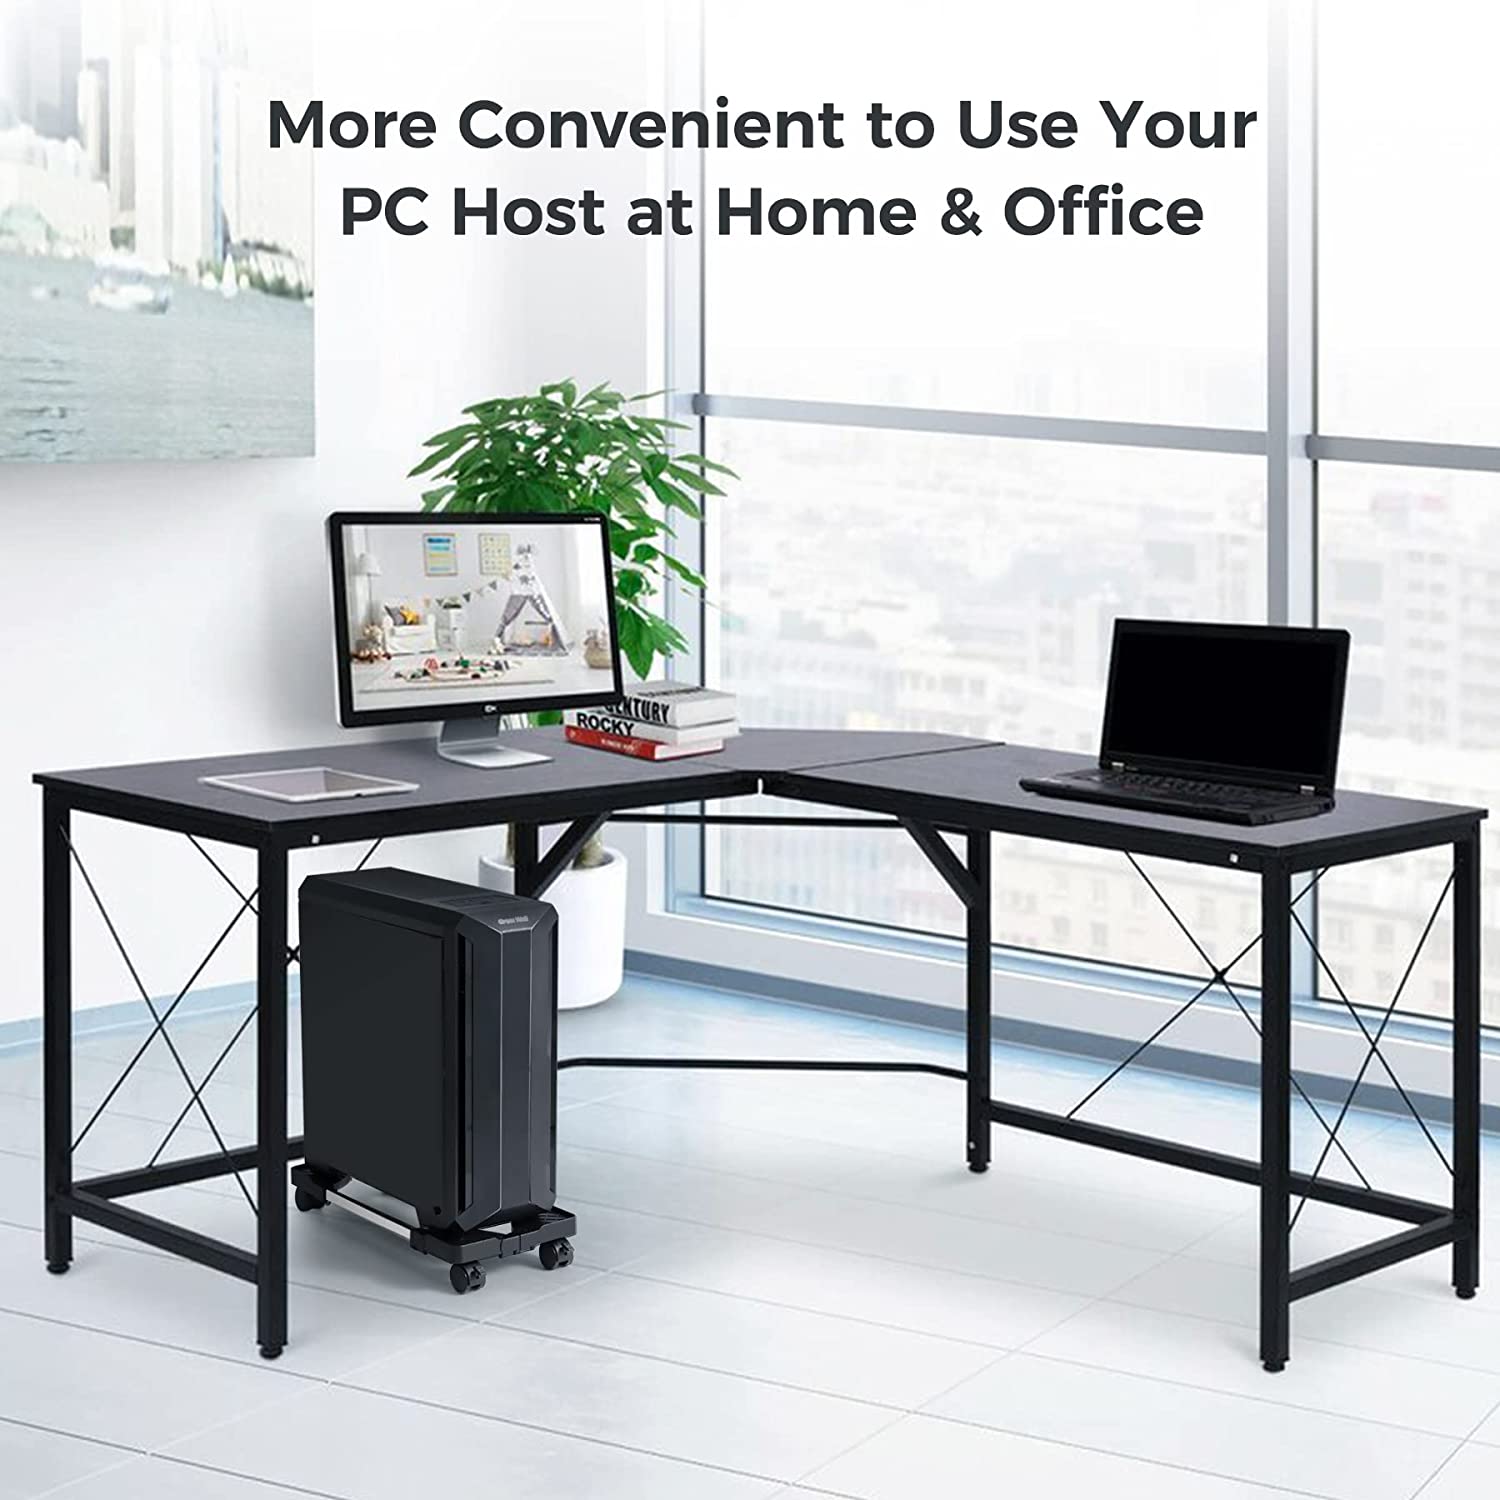 Computer-Accessories-PC-Stand-with-Casters-5-Wheel-Mobile-Desktop-Tower-Computer-Floor-Stand-Adjustable-Width-from-6-11-Inches-Computer-Mainframe-Tray-Holder-Chassis-Stand-27